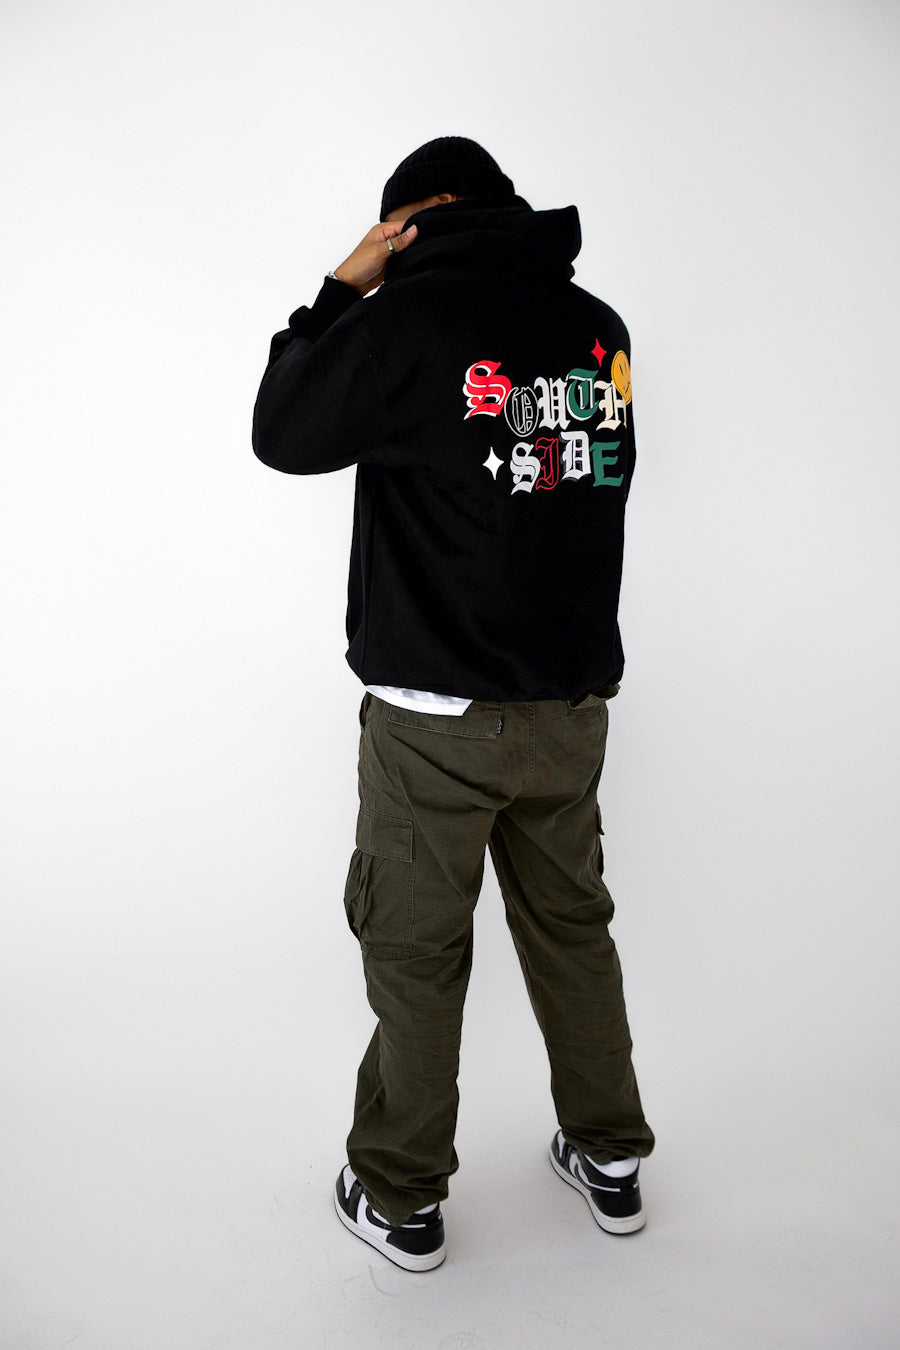 Southside - Nothin' But Happiness Hoodie (Black)